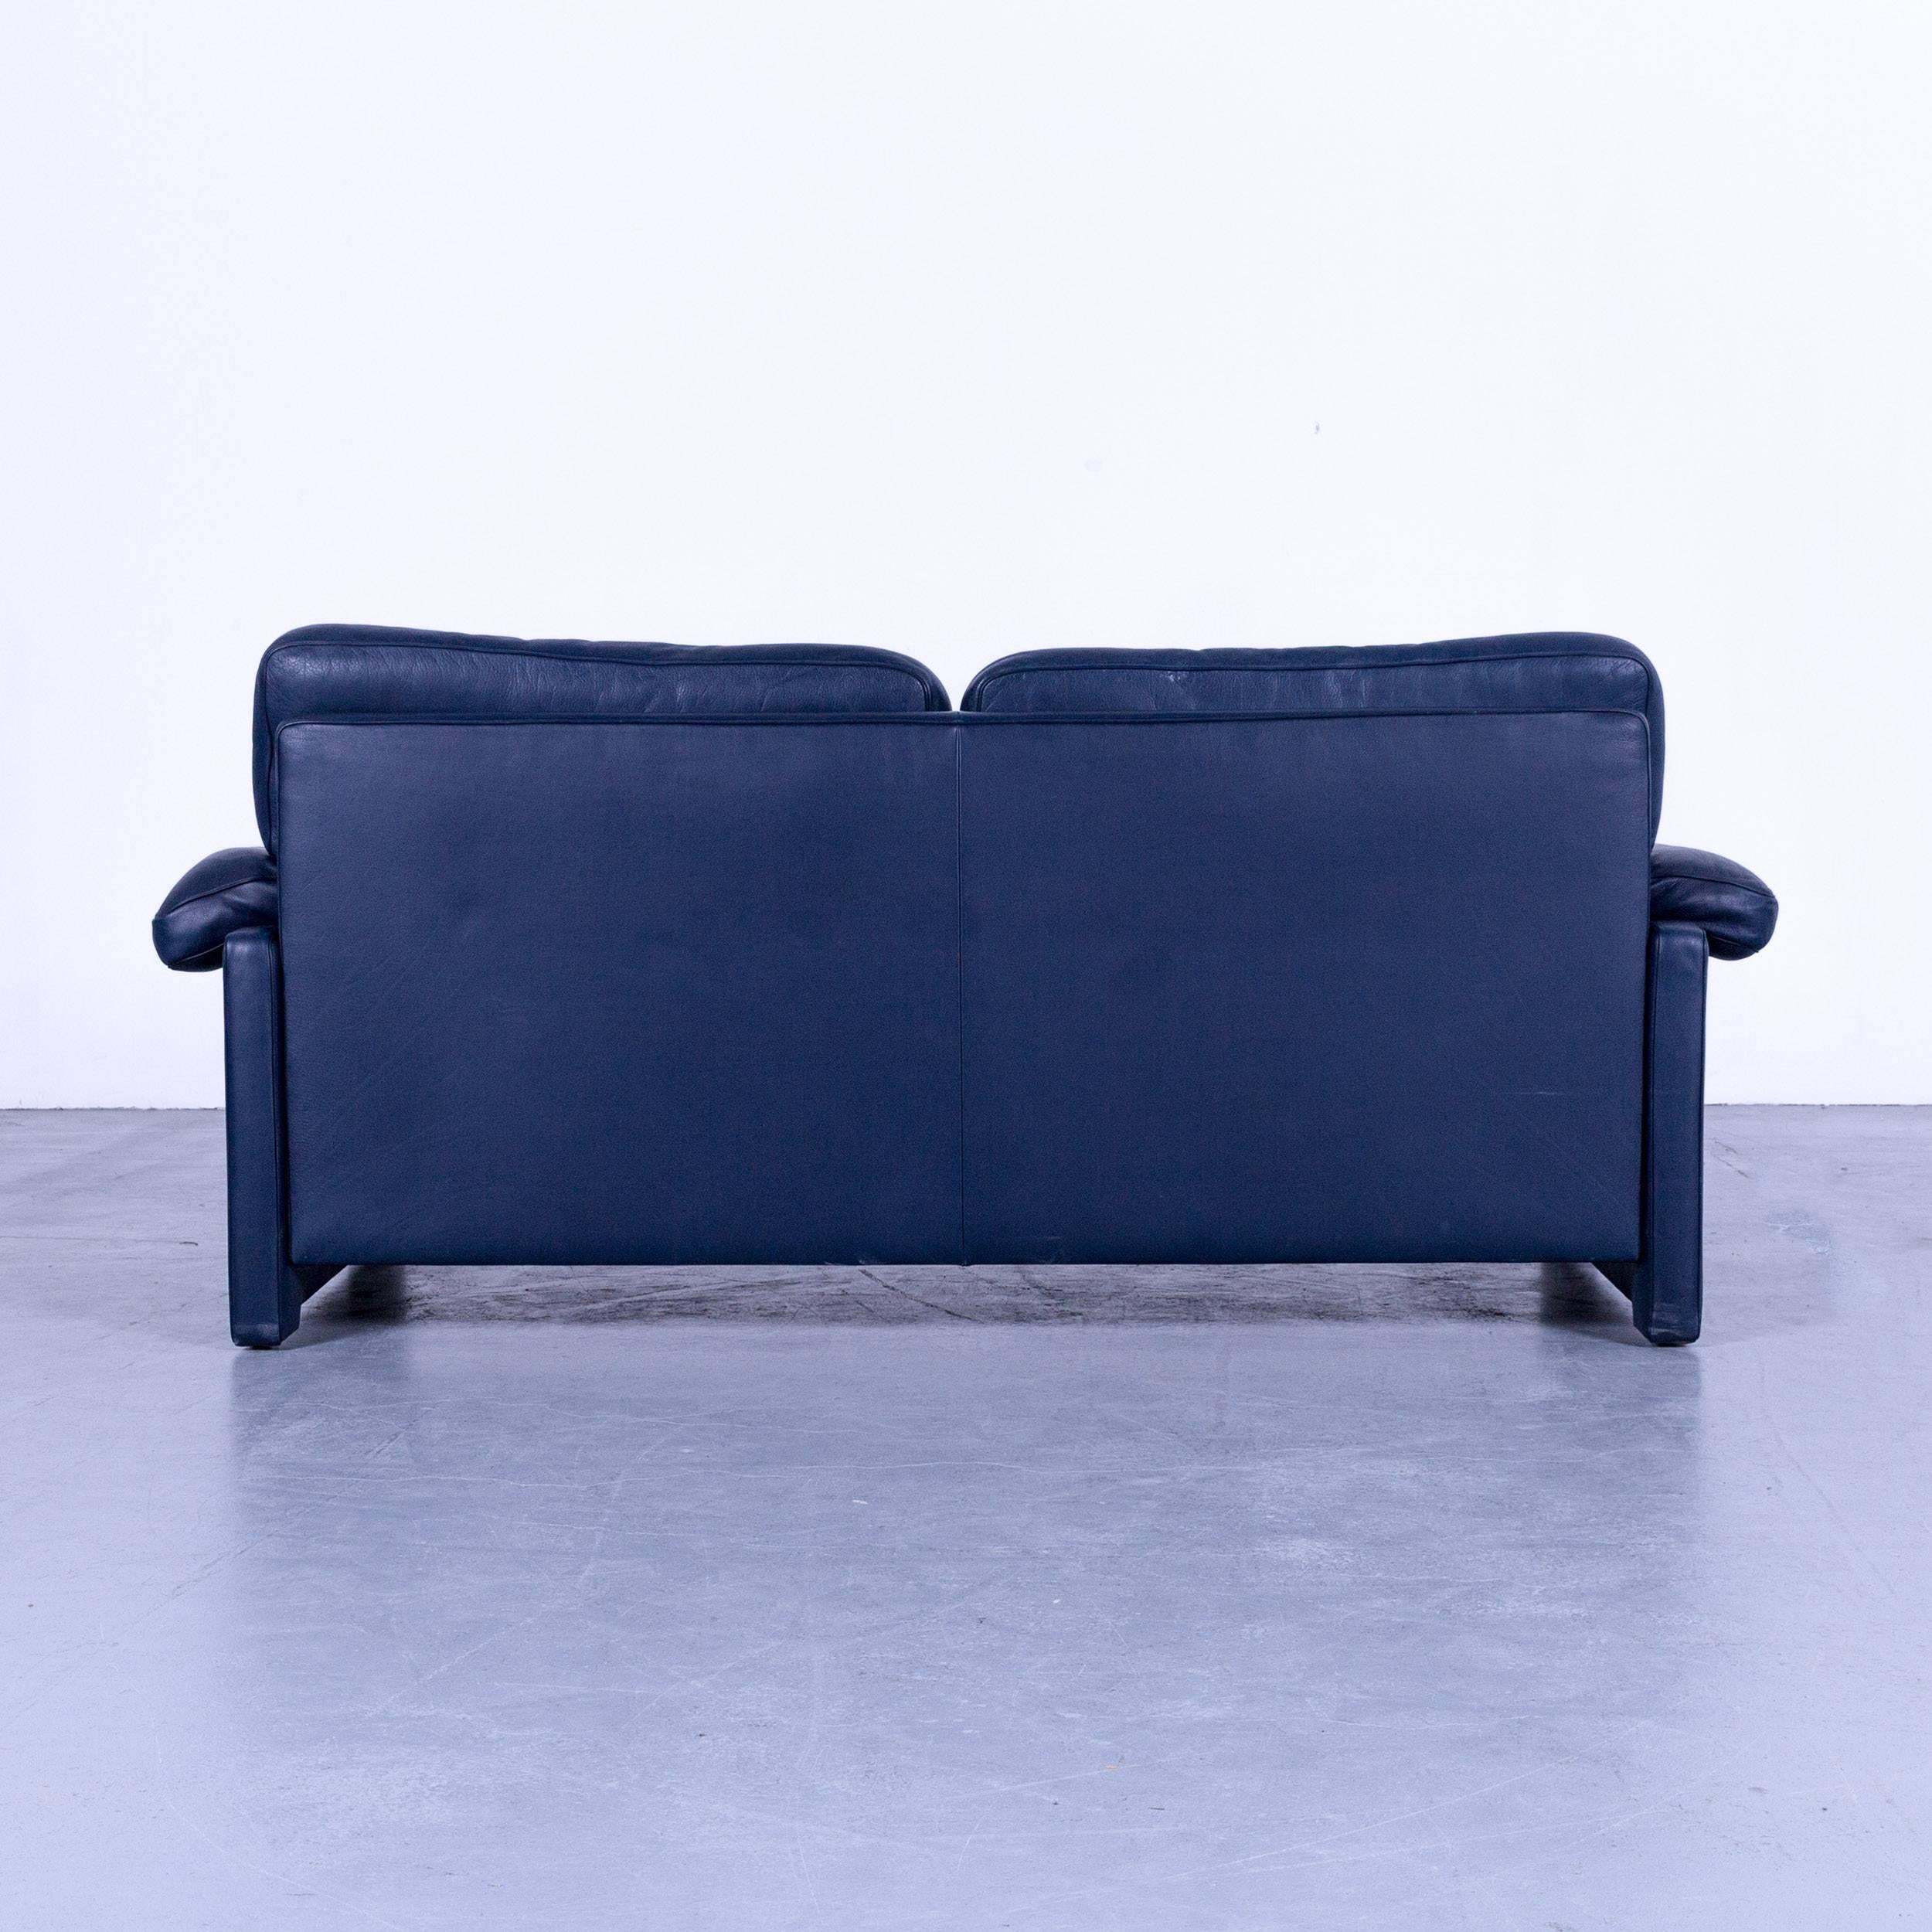 De Sede DS 70 Designer Sofa Navy Blue Leather Two-Seat Couch Switzerland 2